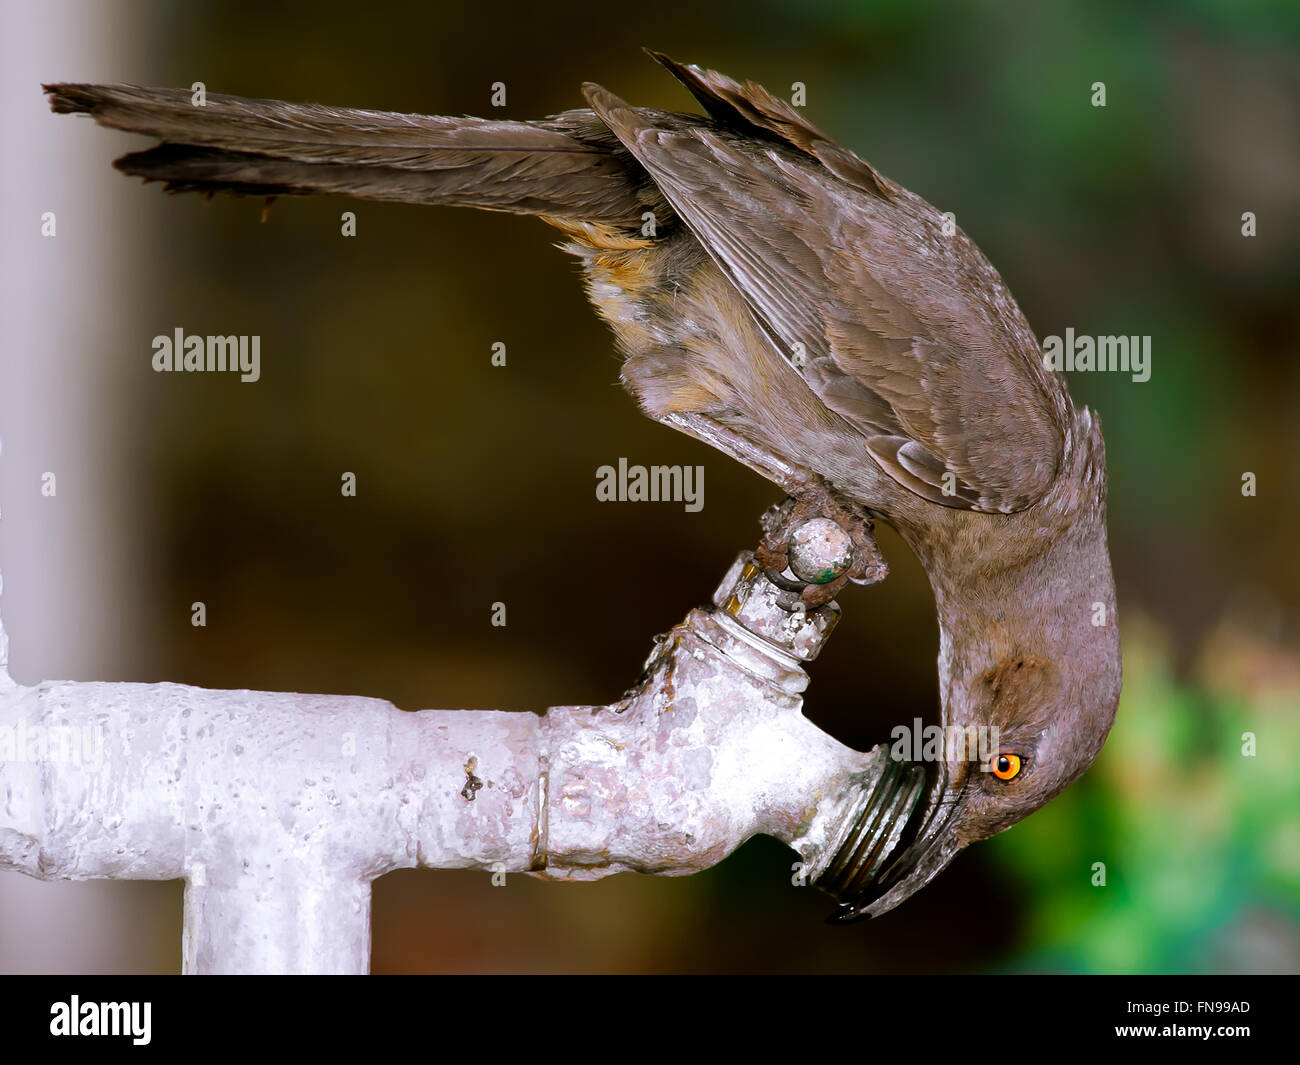 Curved-bill thrasher Bird drinking from an outdoor tap, Arizona, United States Stock Photo